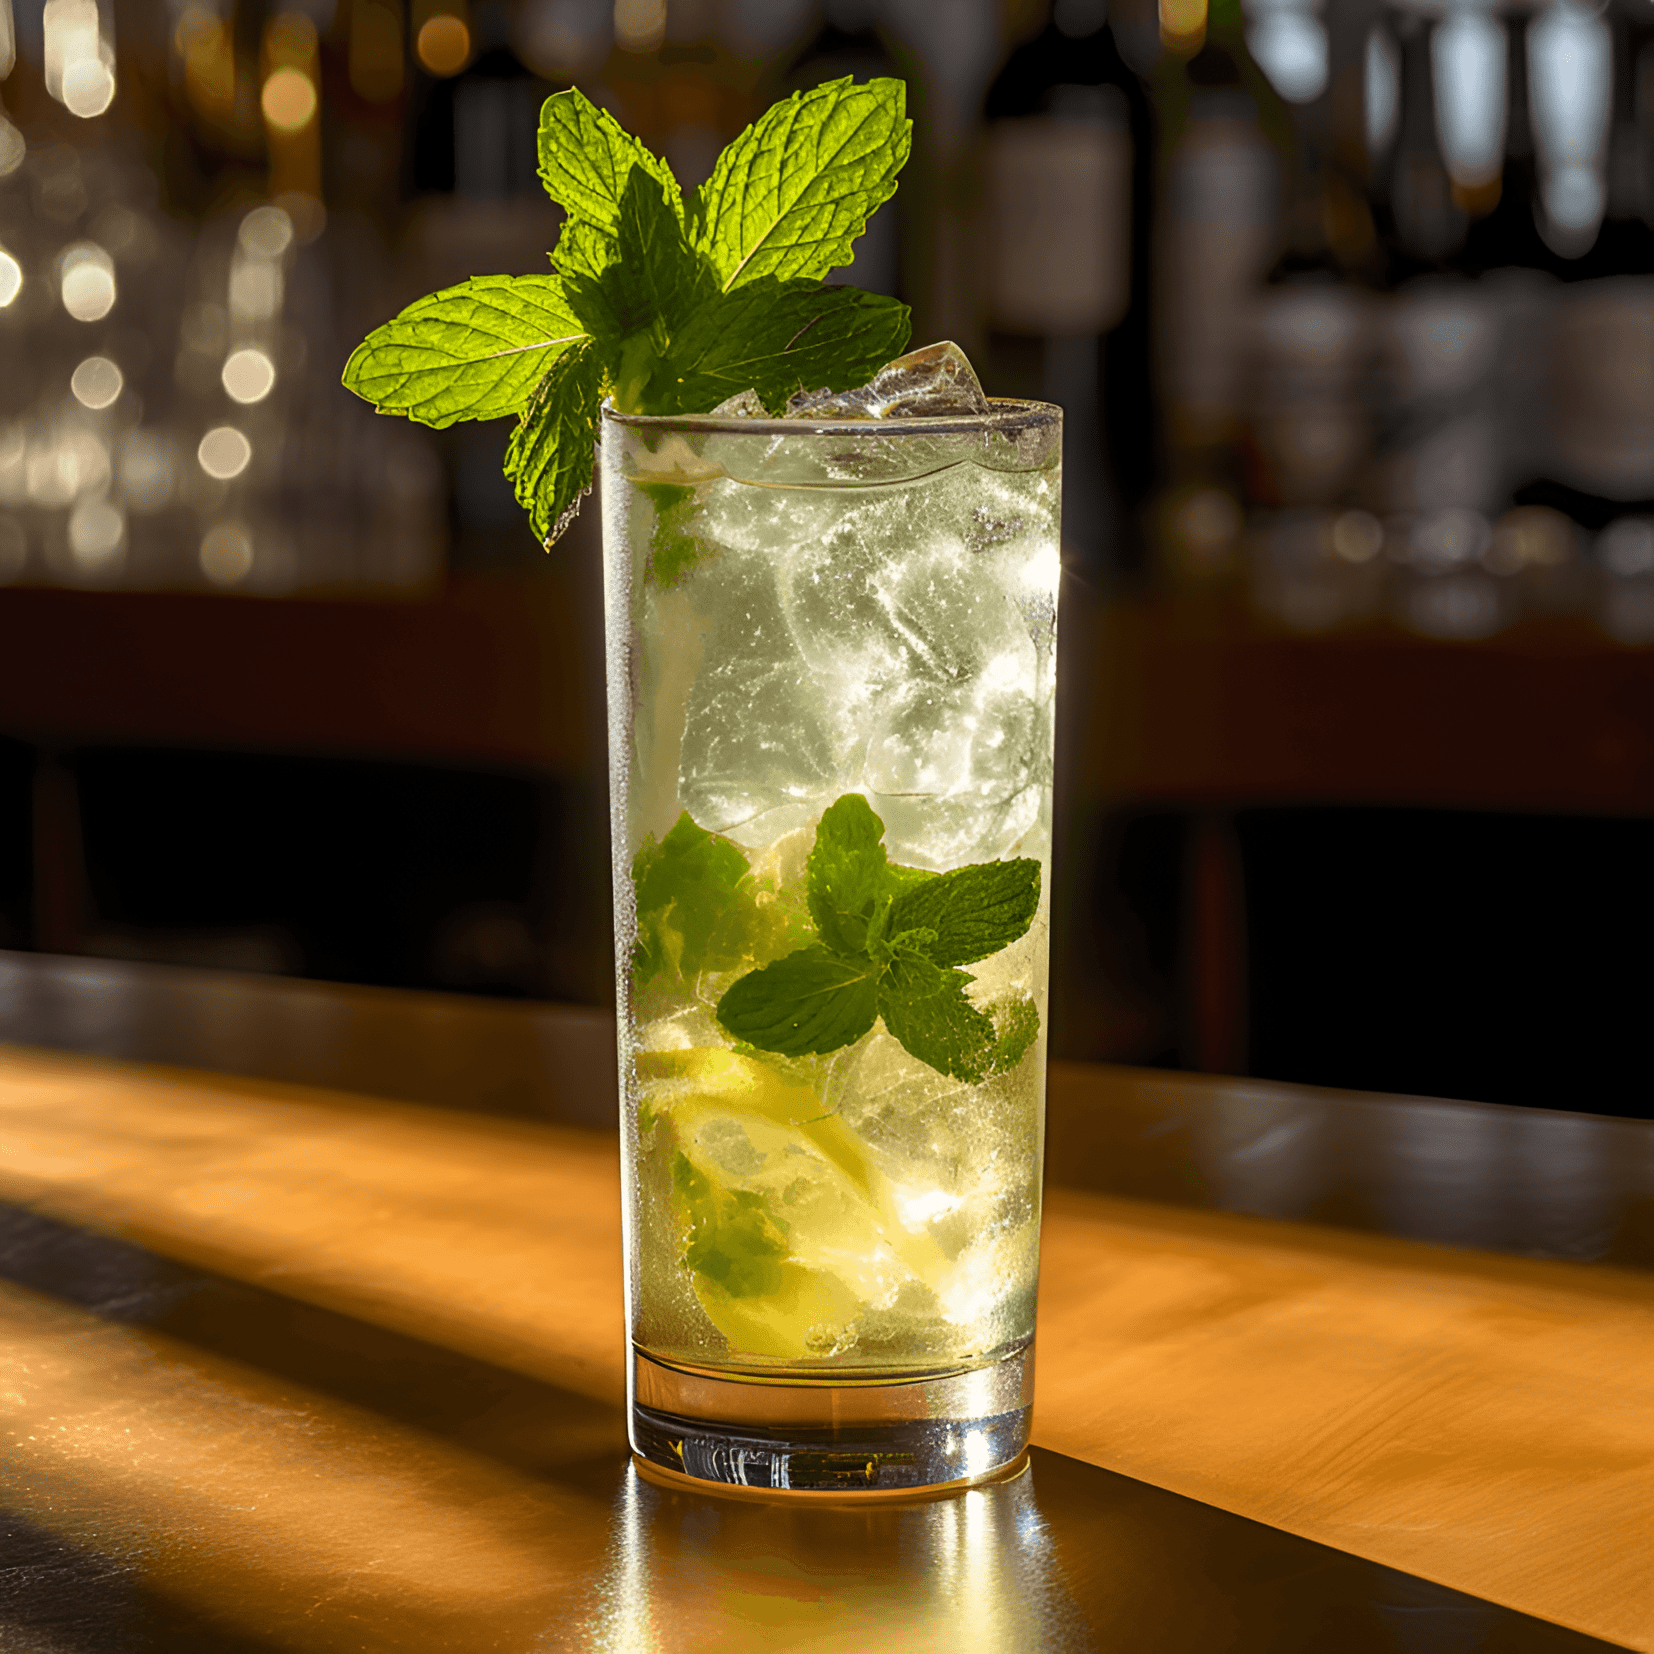 South Side Cocktail Recipe - The South Side cocktail is a refreshing, citrusy, and slightly minty drink with a hint of sweetness. It is light and easy to drink, making it perfect for warm weather or as an aperitif.